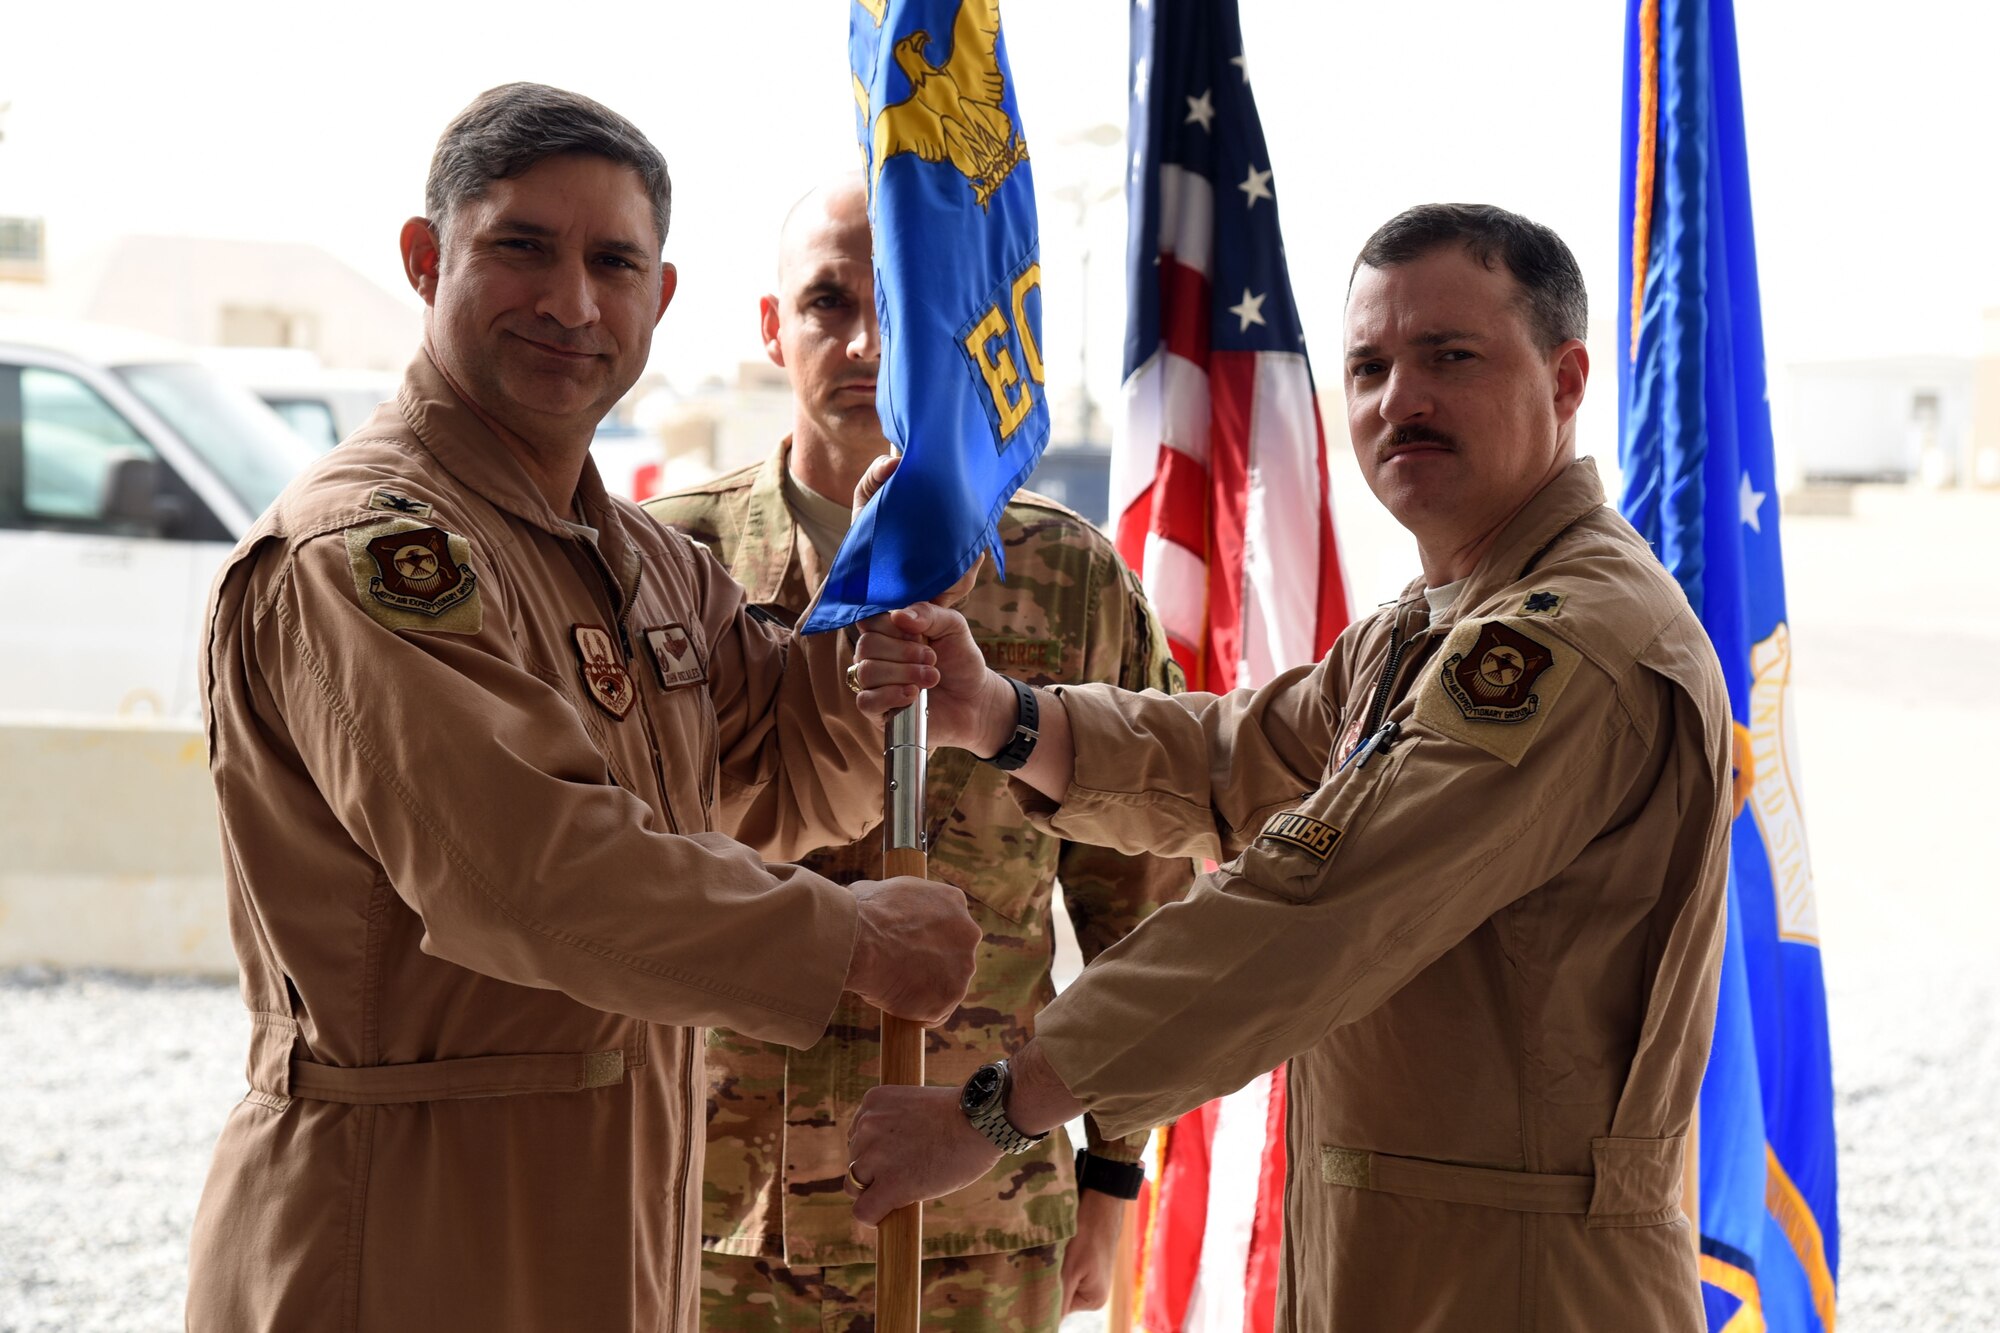 U.S. Air Force Col. John Gonzales, 407th Air Expeditionary Group Commander, passes a guideon to Lt. Col. Samuel Stitt, 407th Expeditionary Operations Support Squadron Commander in Southwest Asia, January 25, 2018. The change of command ceremony is a time honored military tradition that signifies the orderly transfer of authority. (U.S. Air Force photo by Staff Sgt. Joshua Edwards/Released)